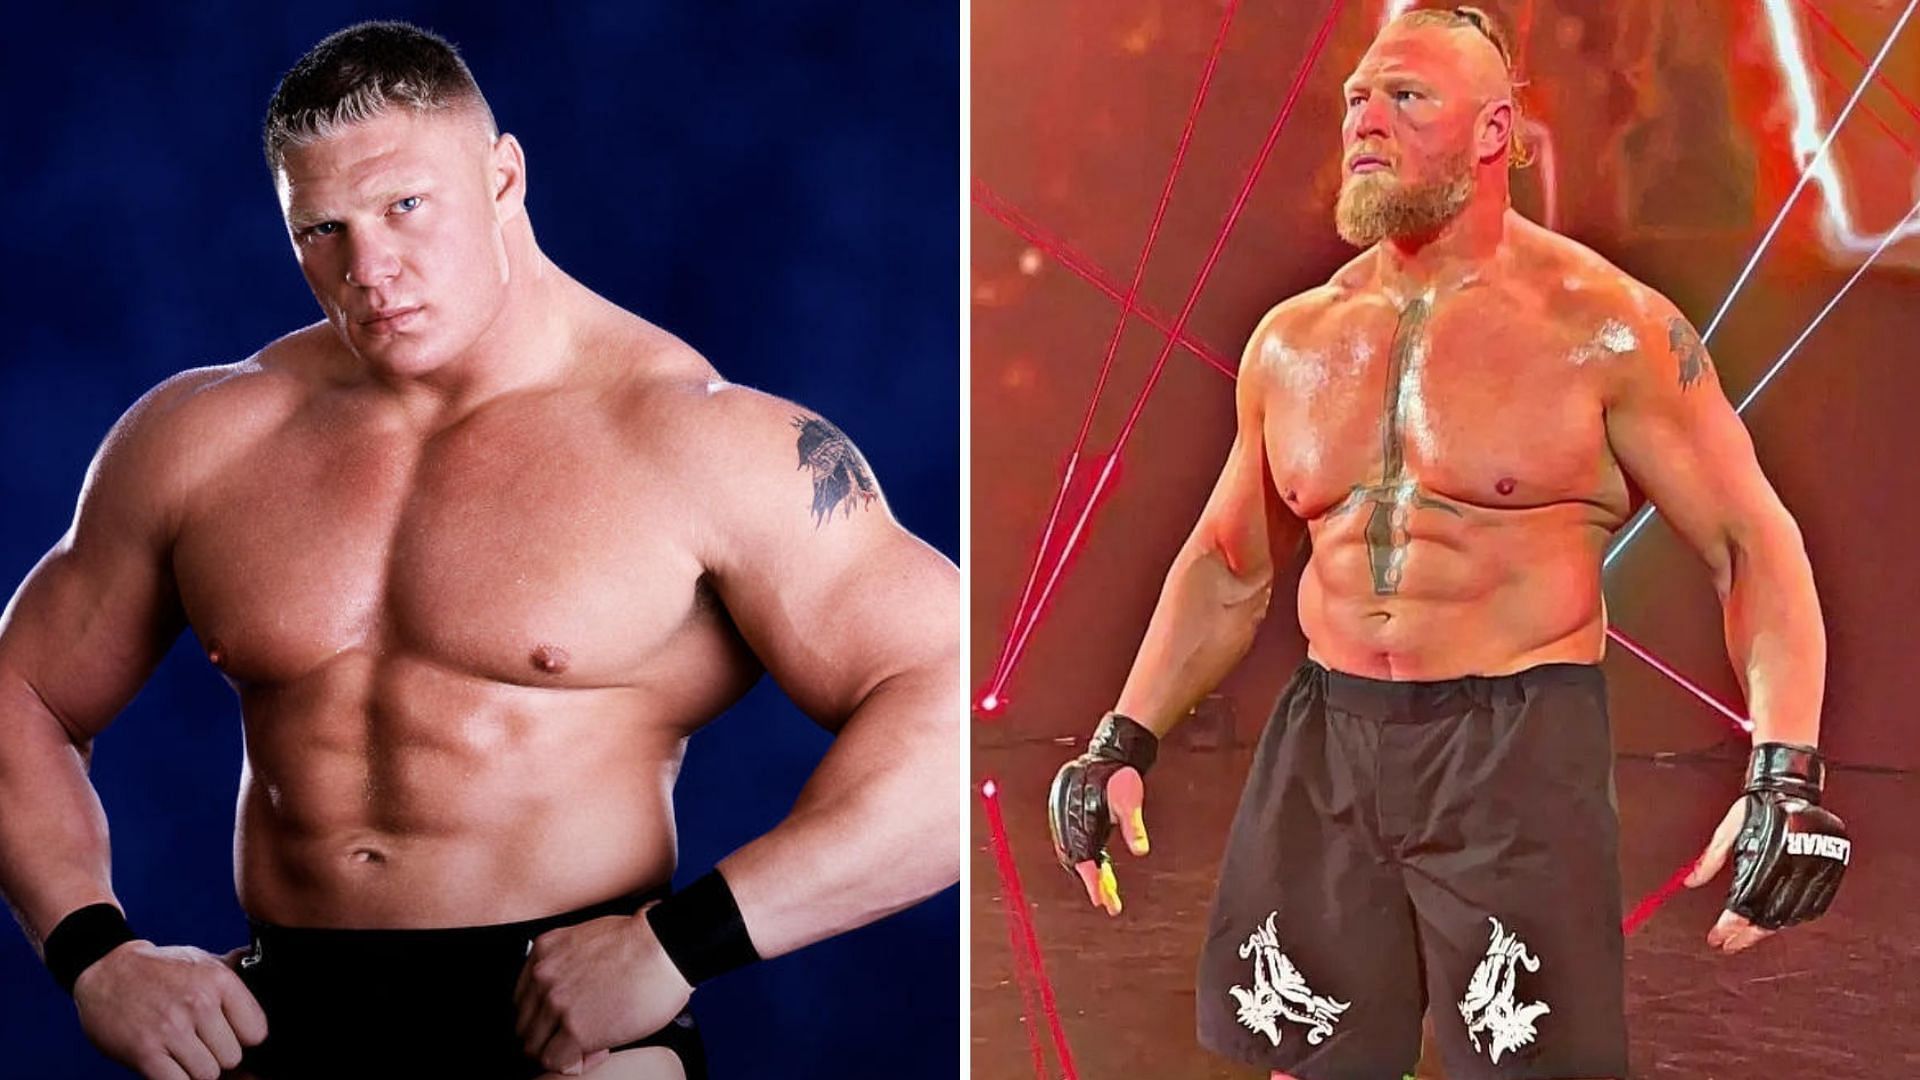 Twenty years later, Brock Lesnar is still at the top of the mountain in WWE